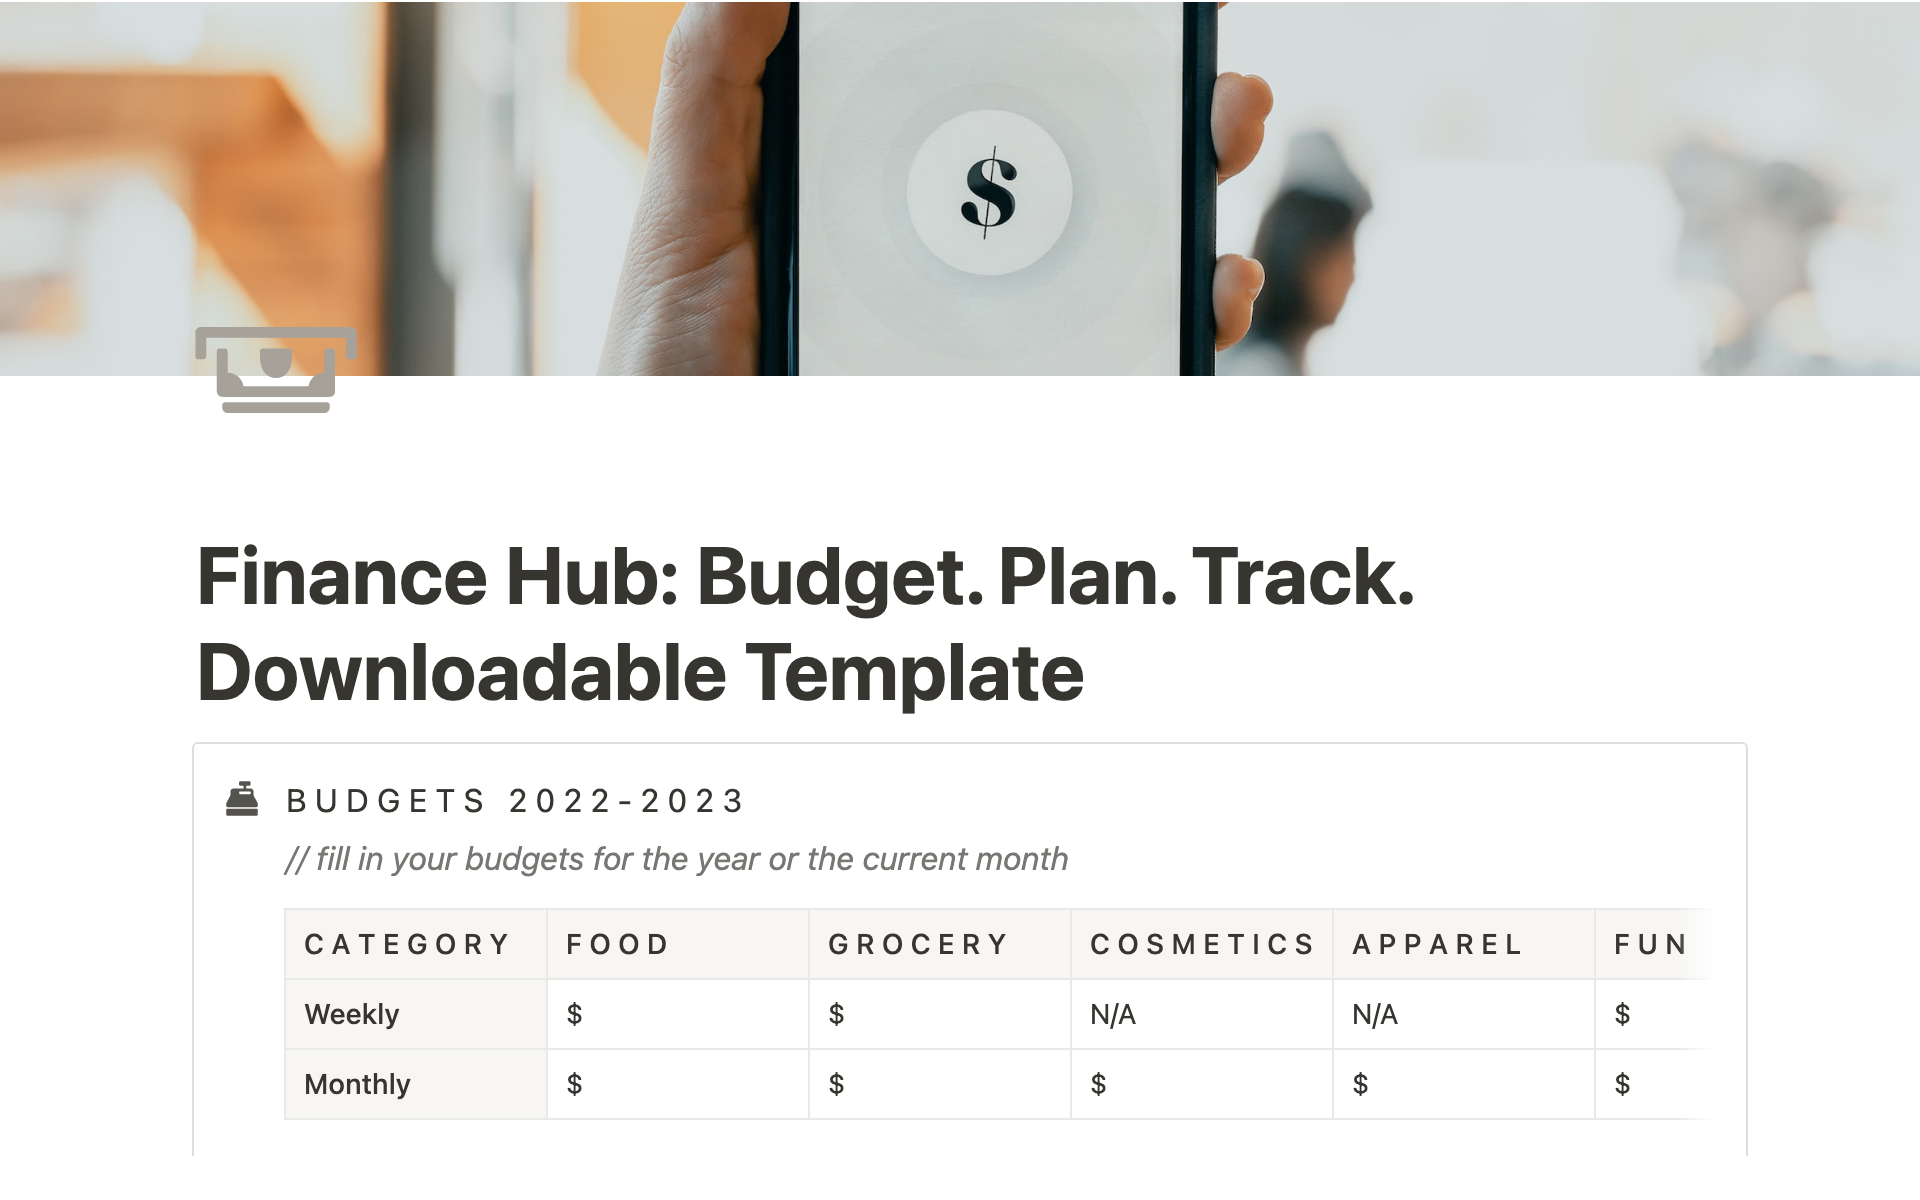 A template preview for Finance Hub: Budget. Plan. Track.